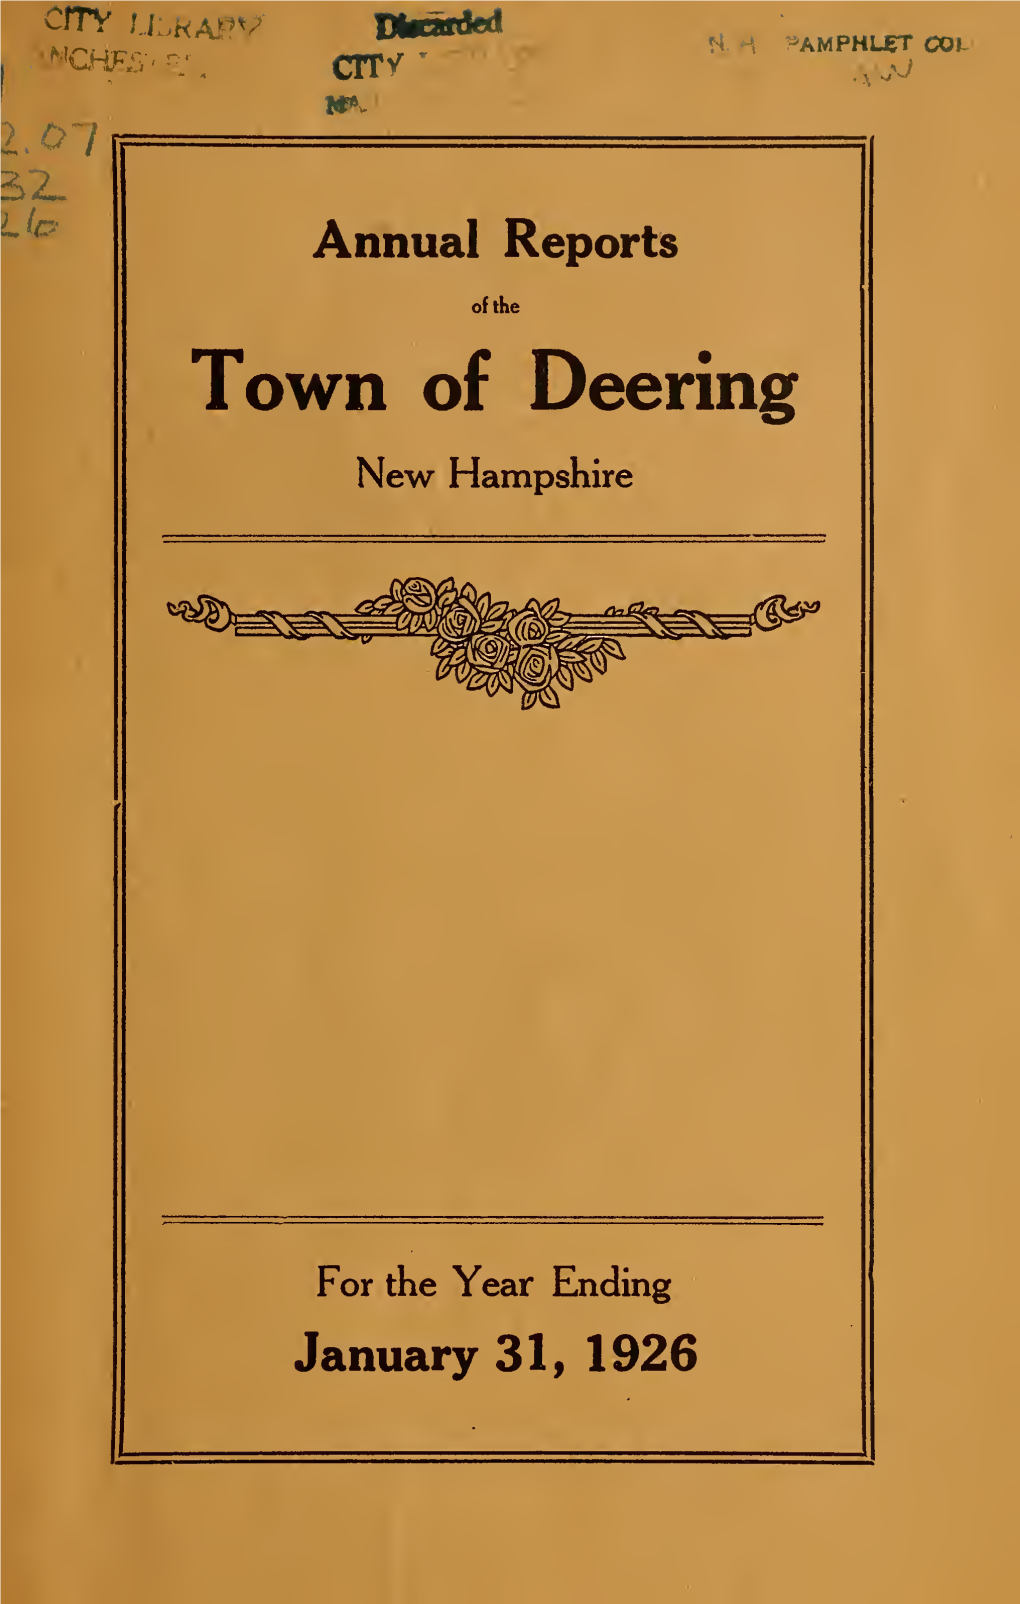 Annual Report of the Receipts and Expenditures of the Town of Deering for the Fiscal Year Ending January 31, 1926, Together With